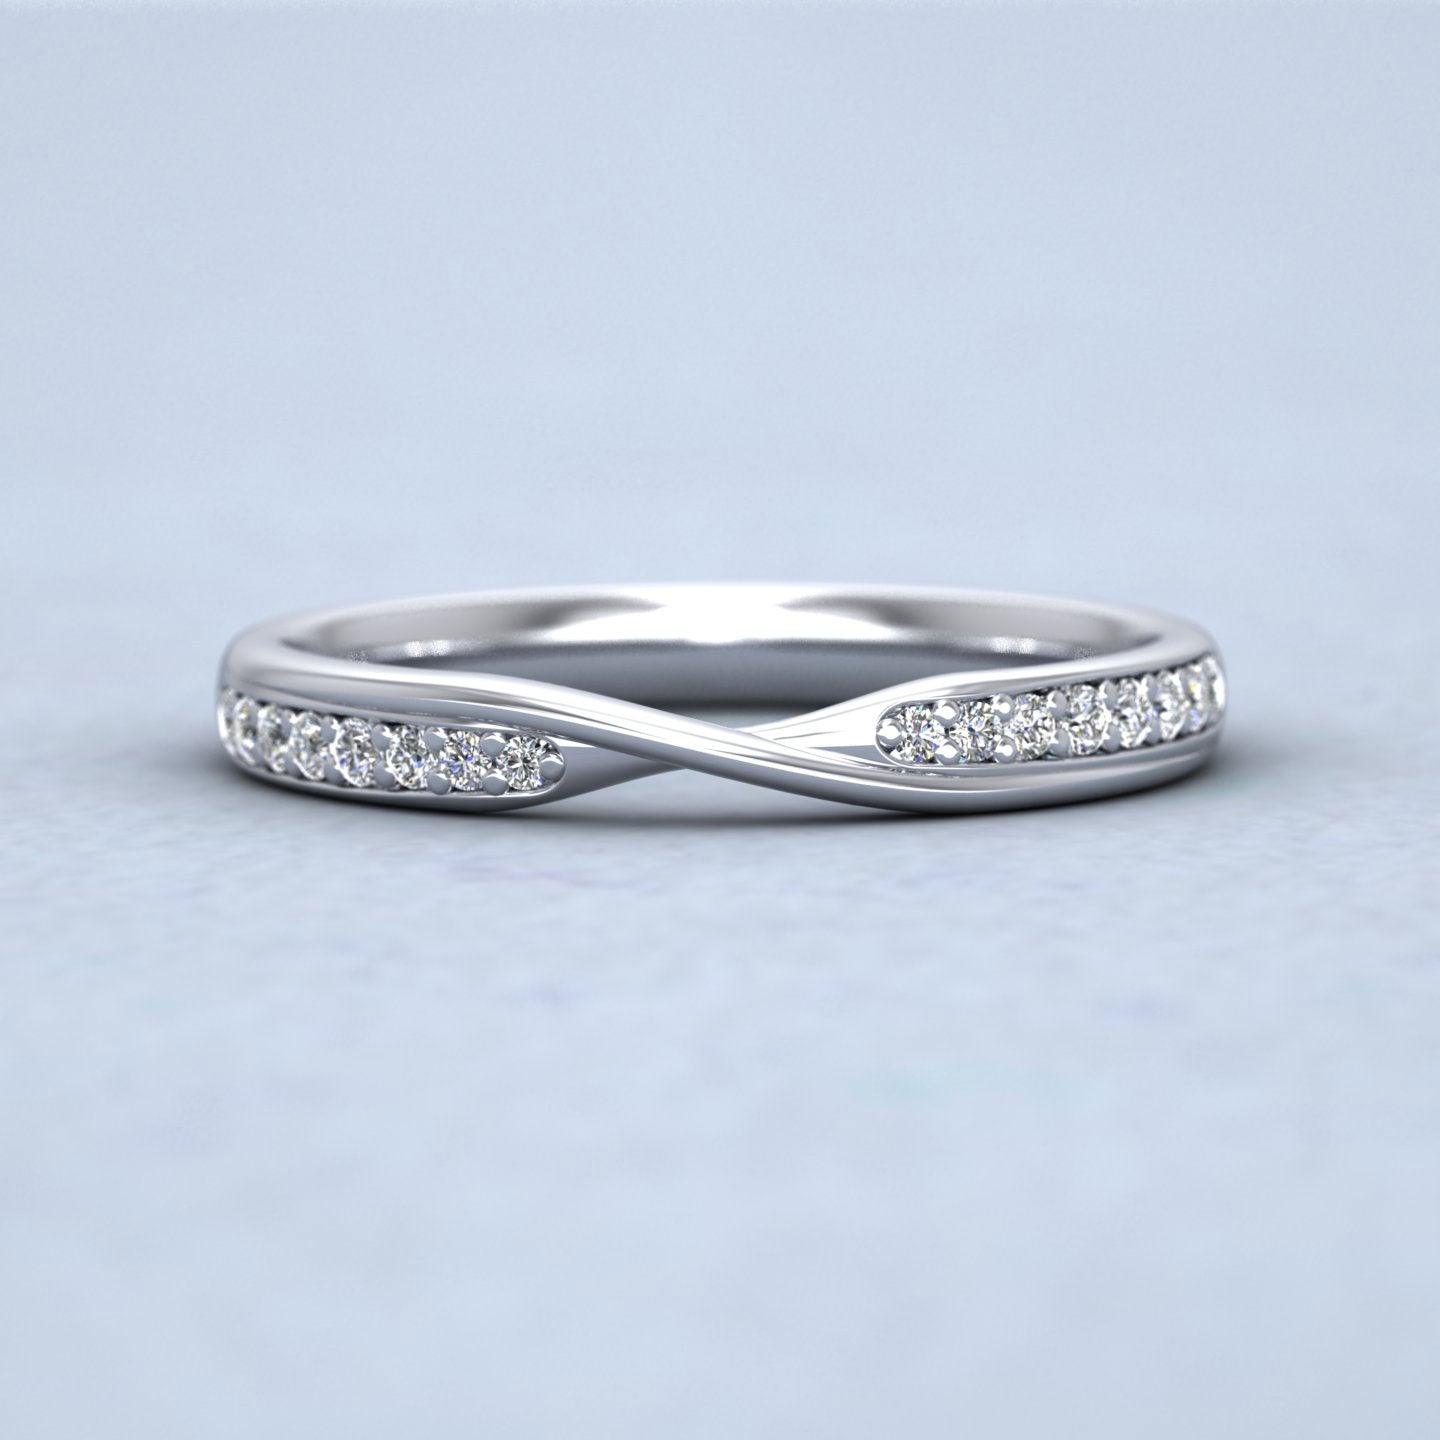 Crossover Pattern Wedding Ring In 18ct White Gold 2.5mm Wide With Sixteen Diamonds